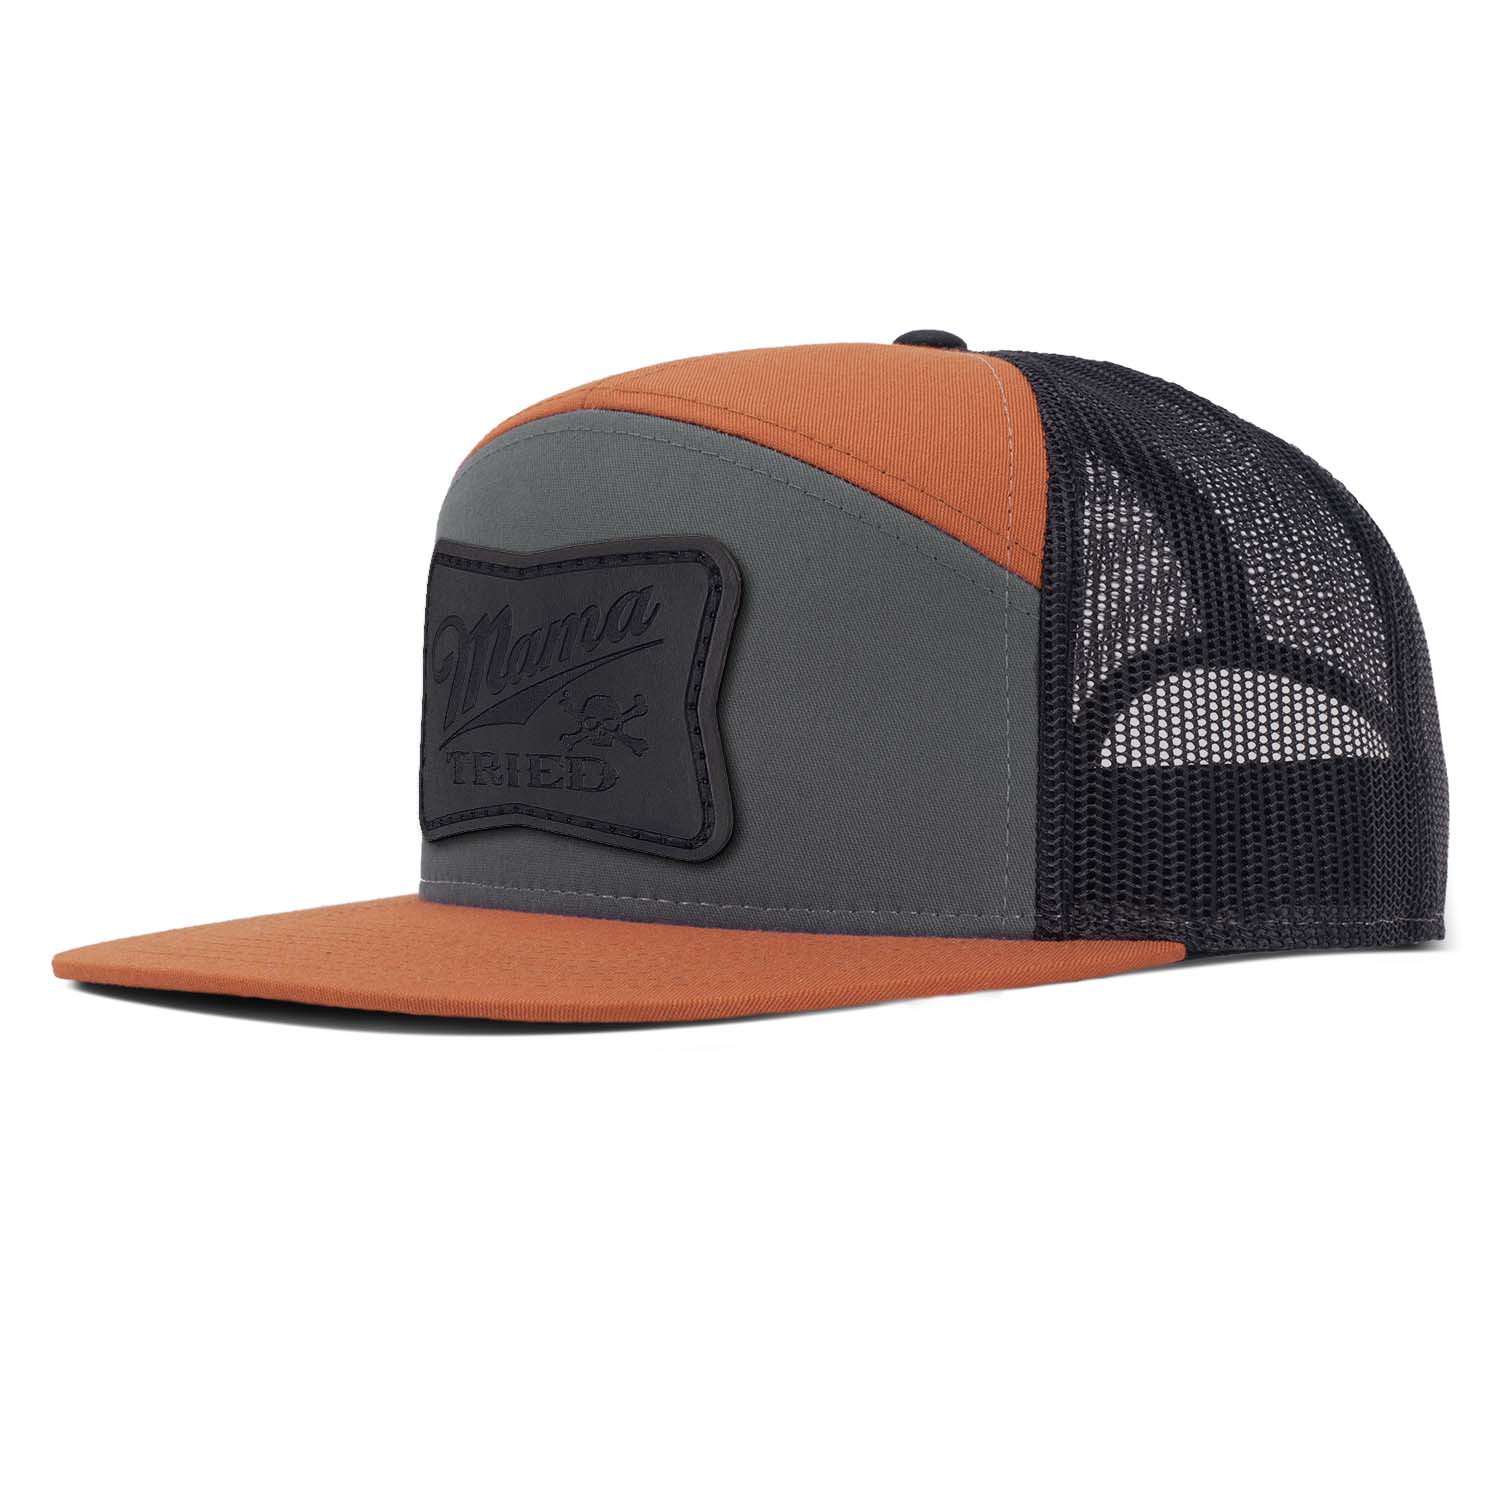 A charcoal and burnt orange 7 panel trucker with black mesh featuring our full grain leather Mama Tried patch in all black on the seamless front panel